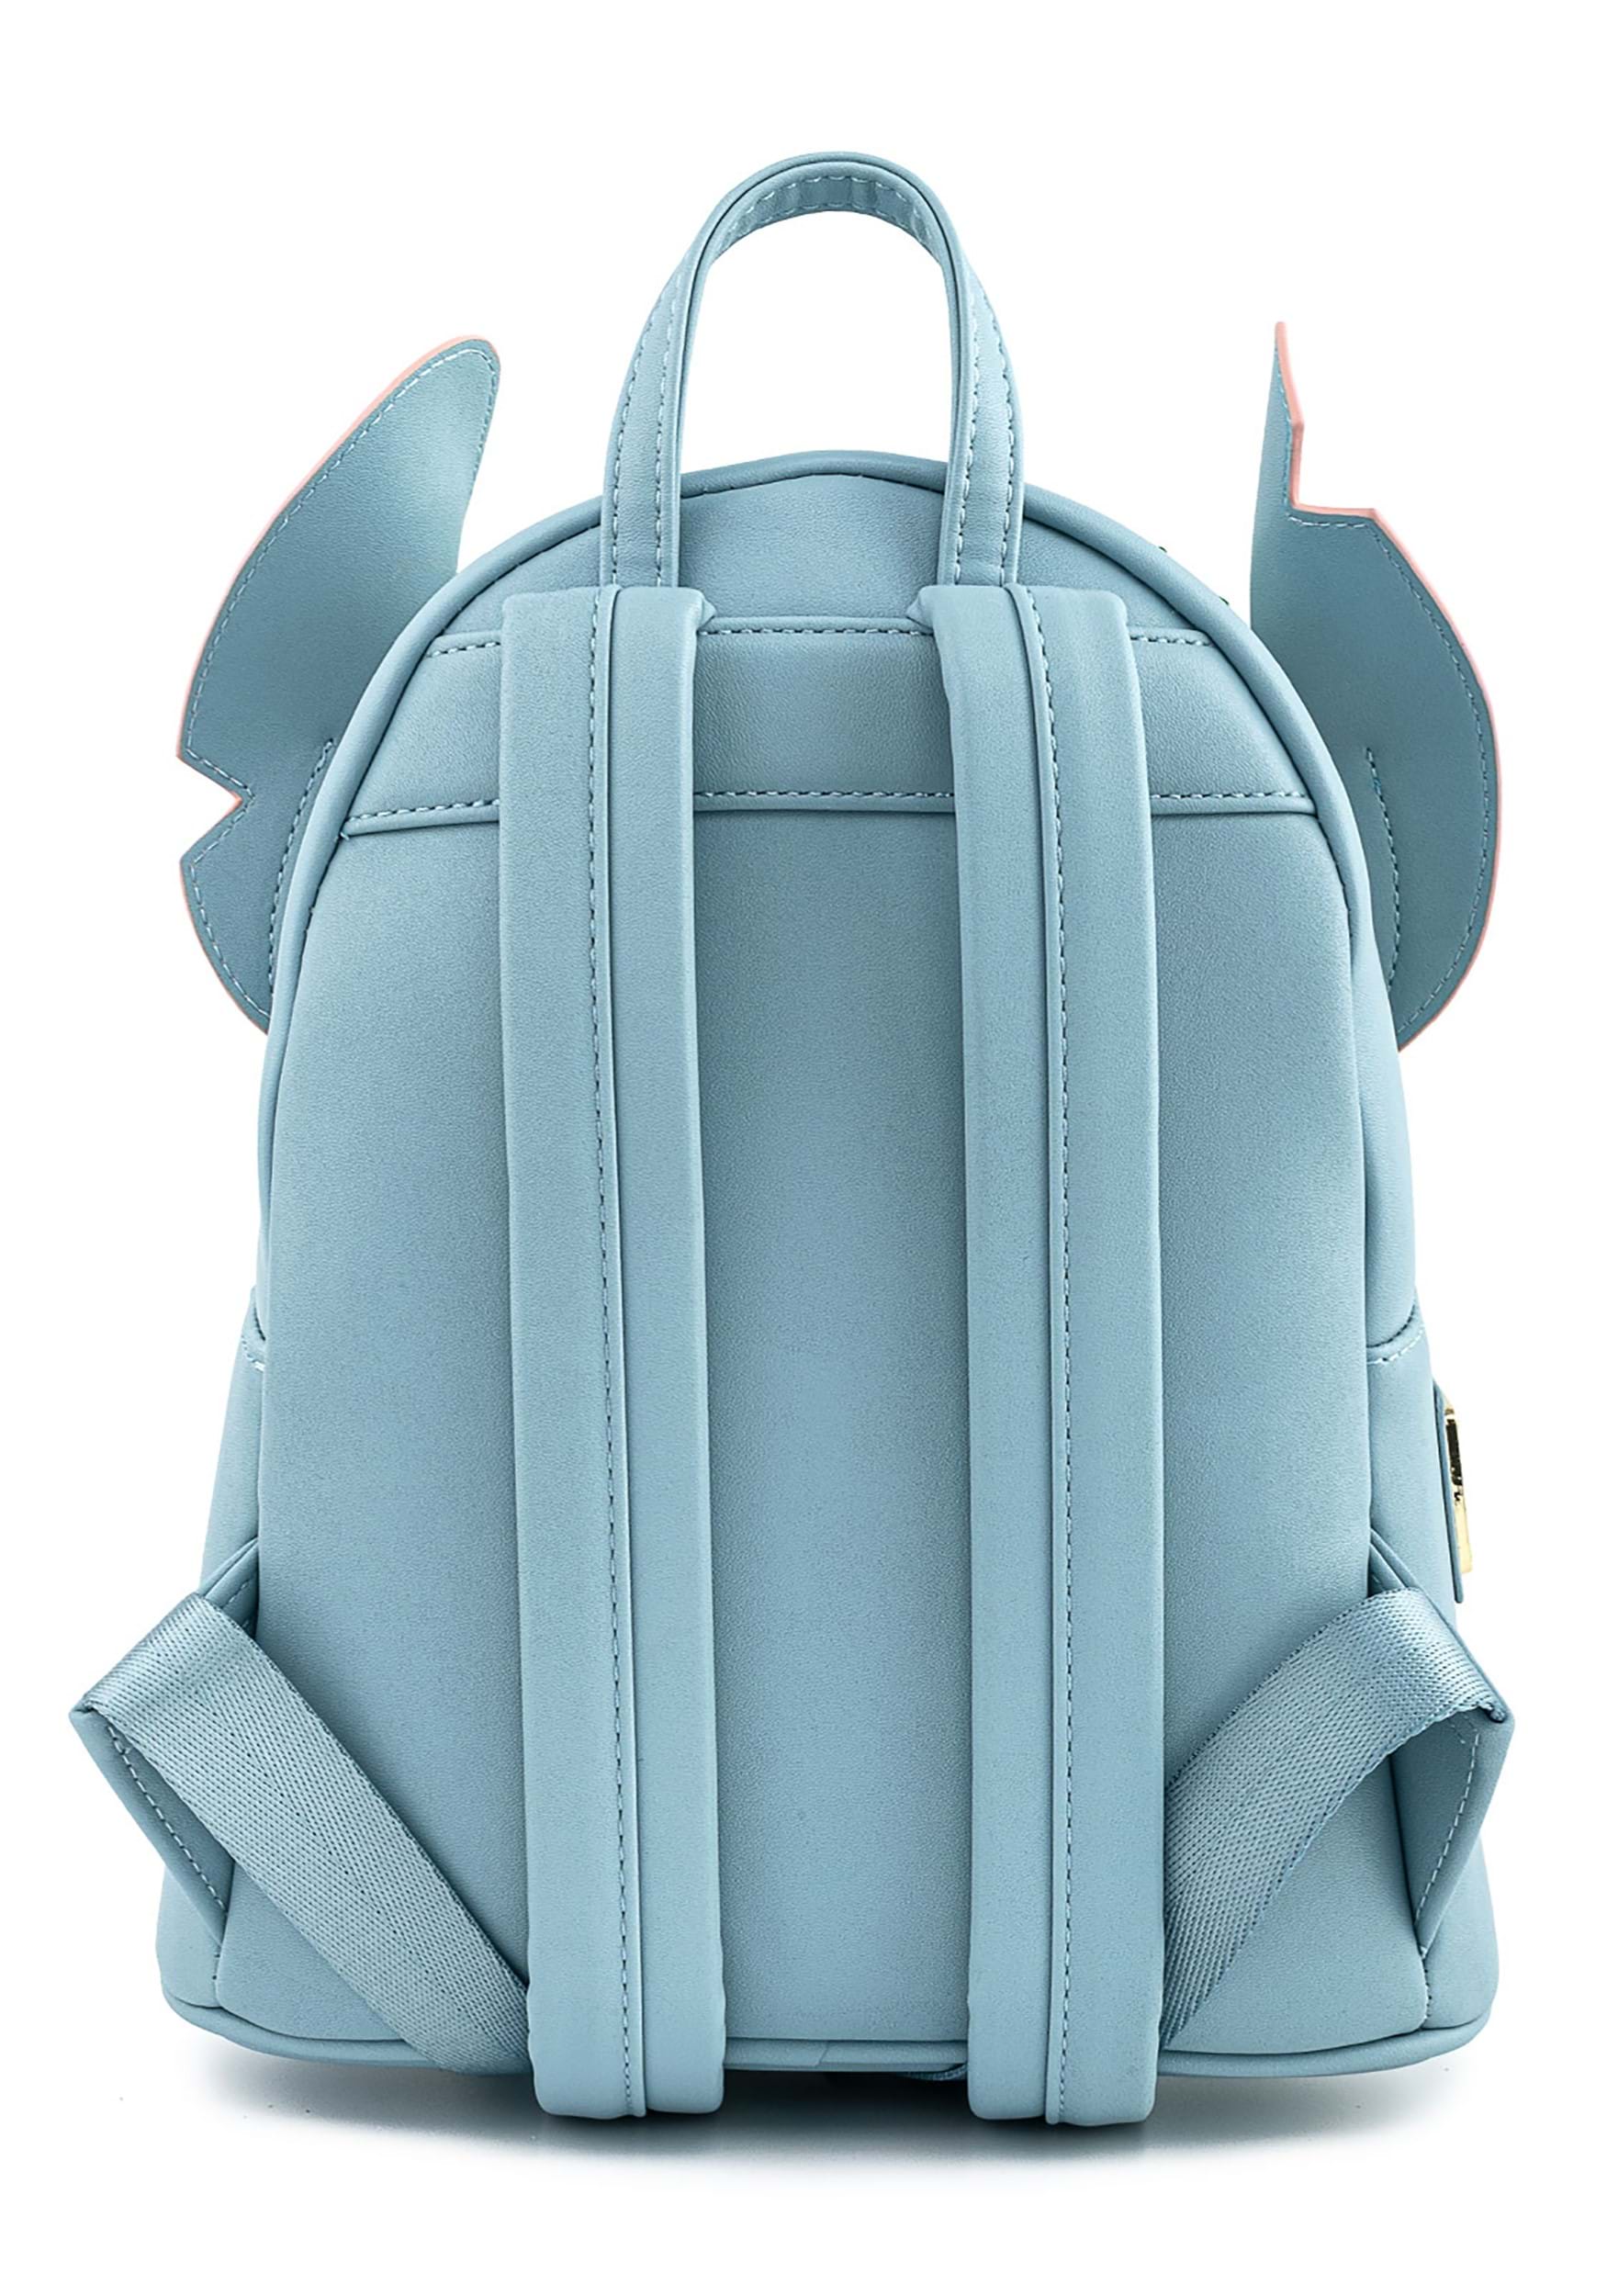 Stitch Halloween Outfits Our Universe Mini backpack